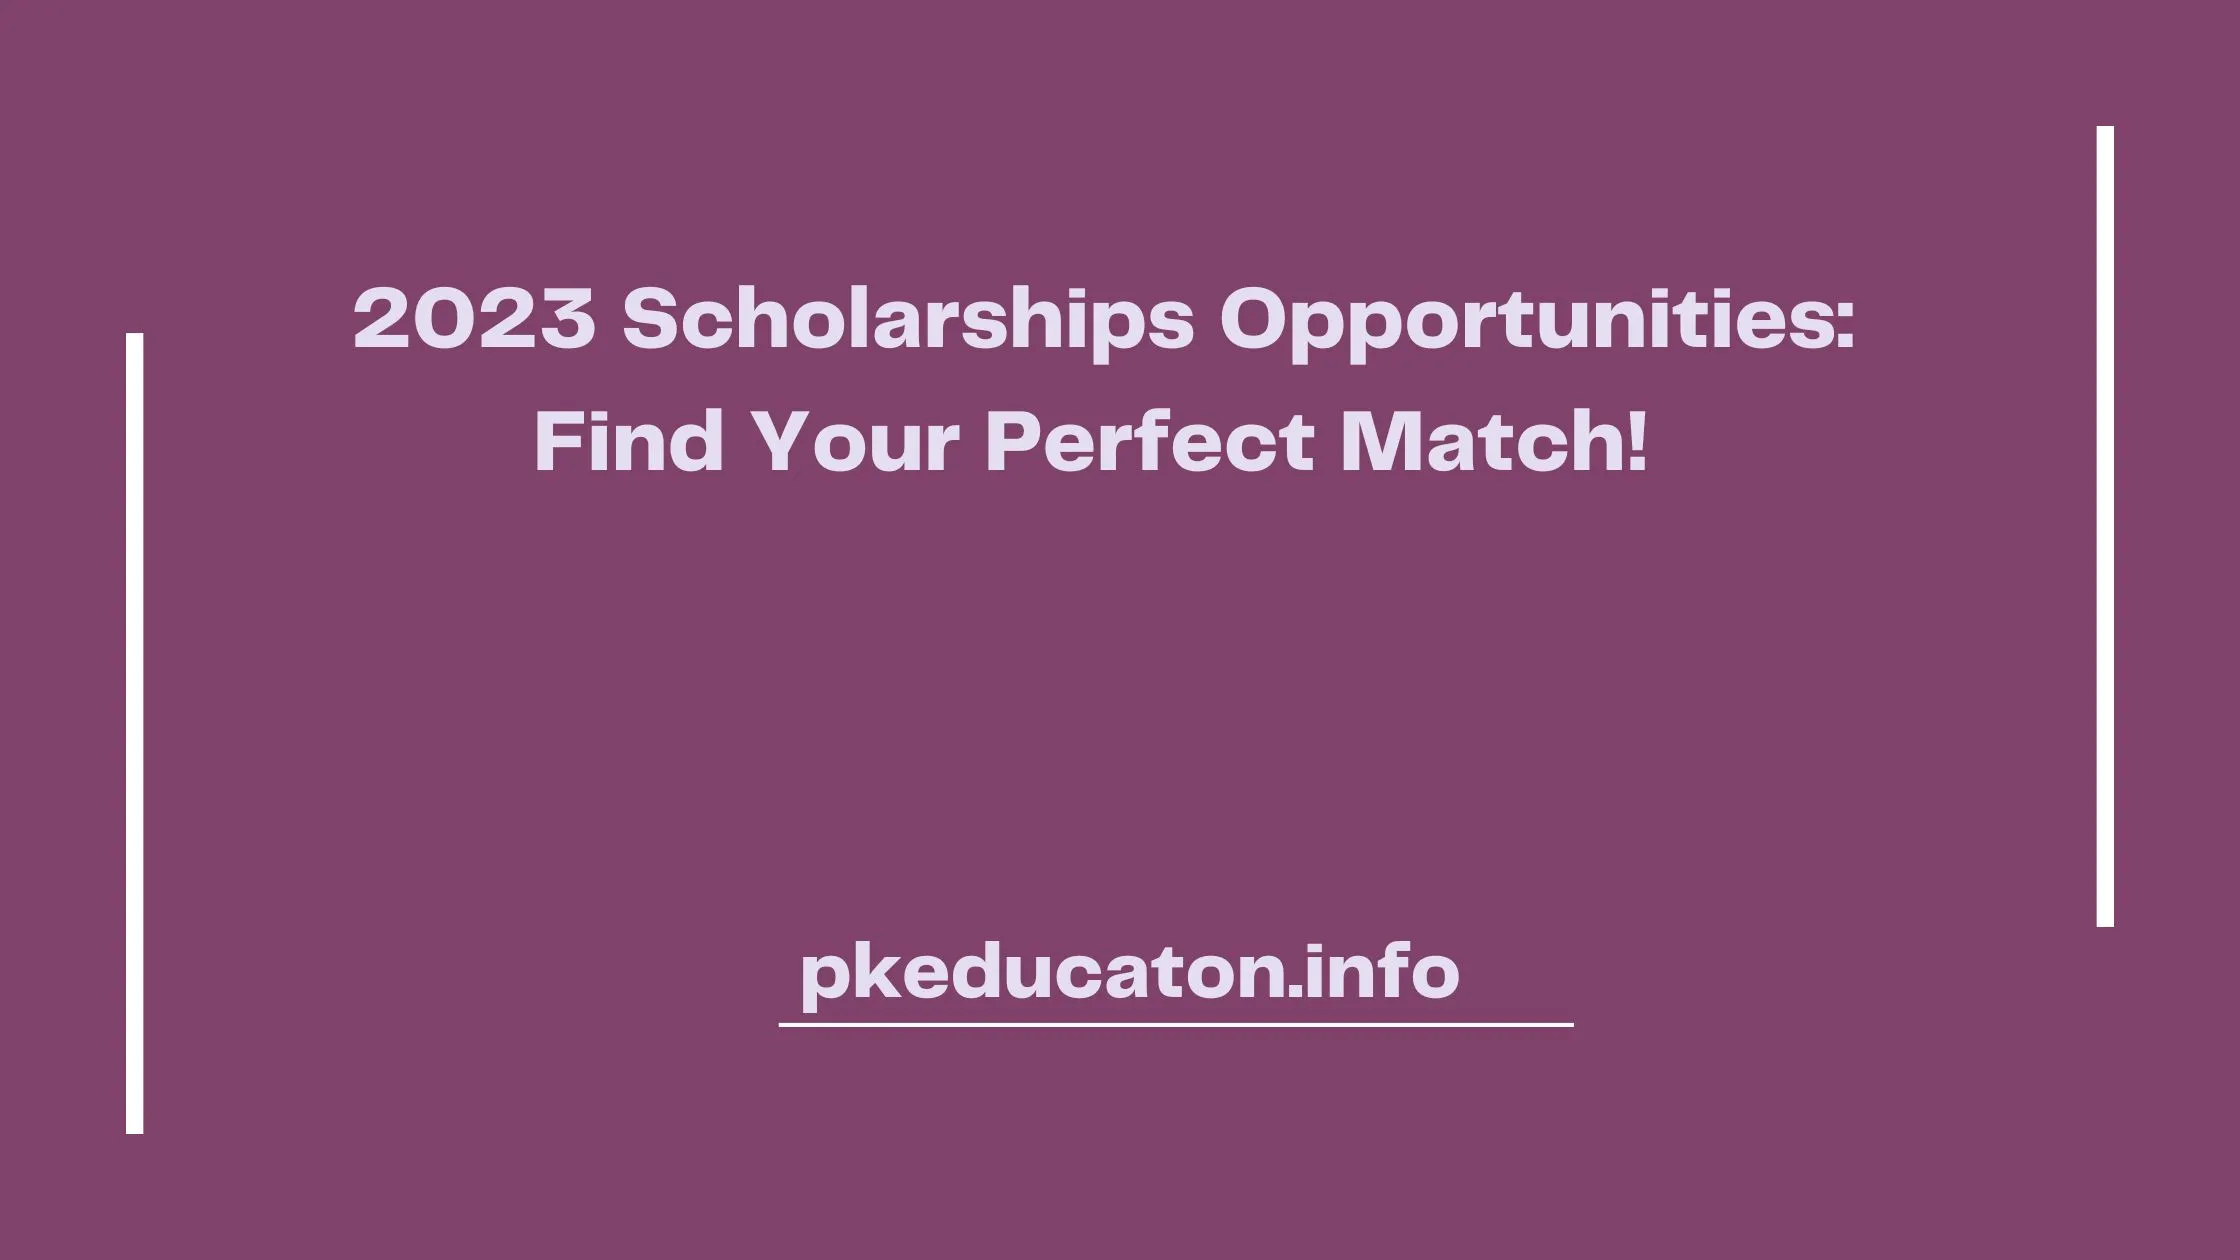 2023 Scholarships Opportunities: Find Your Perfect Match!